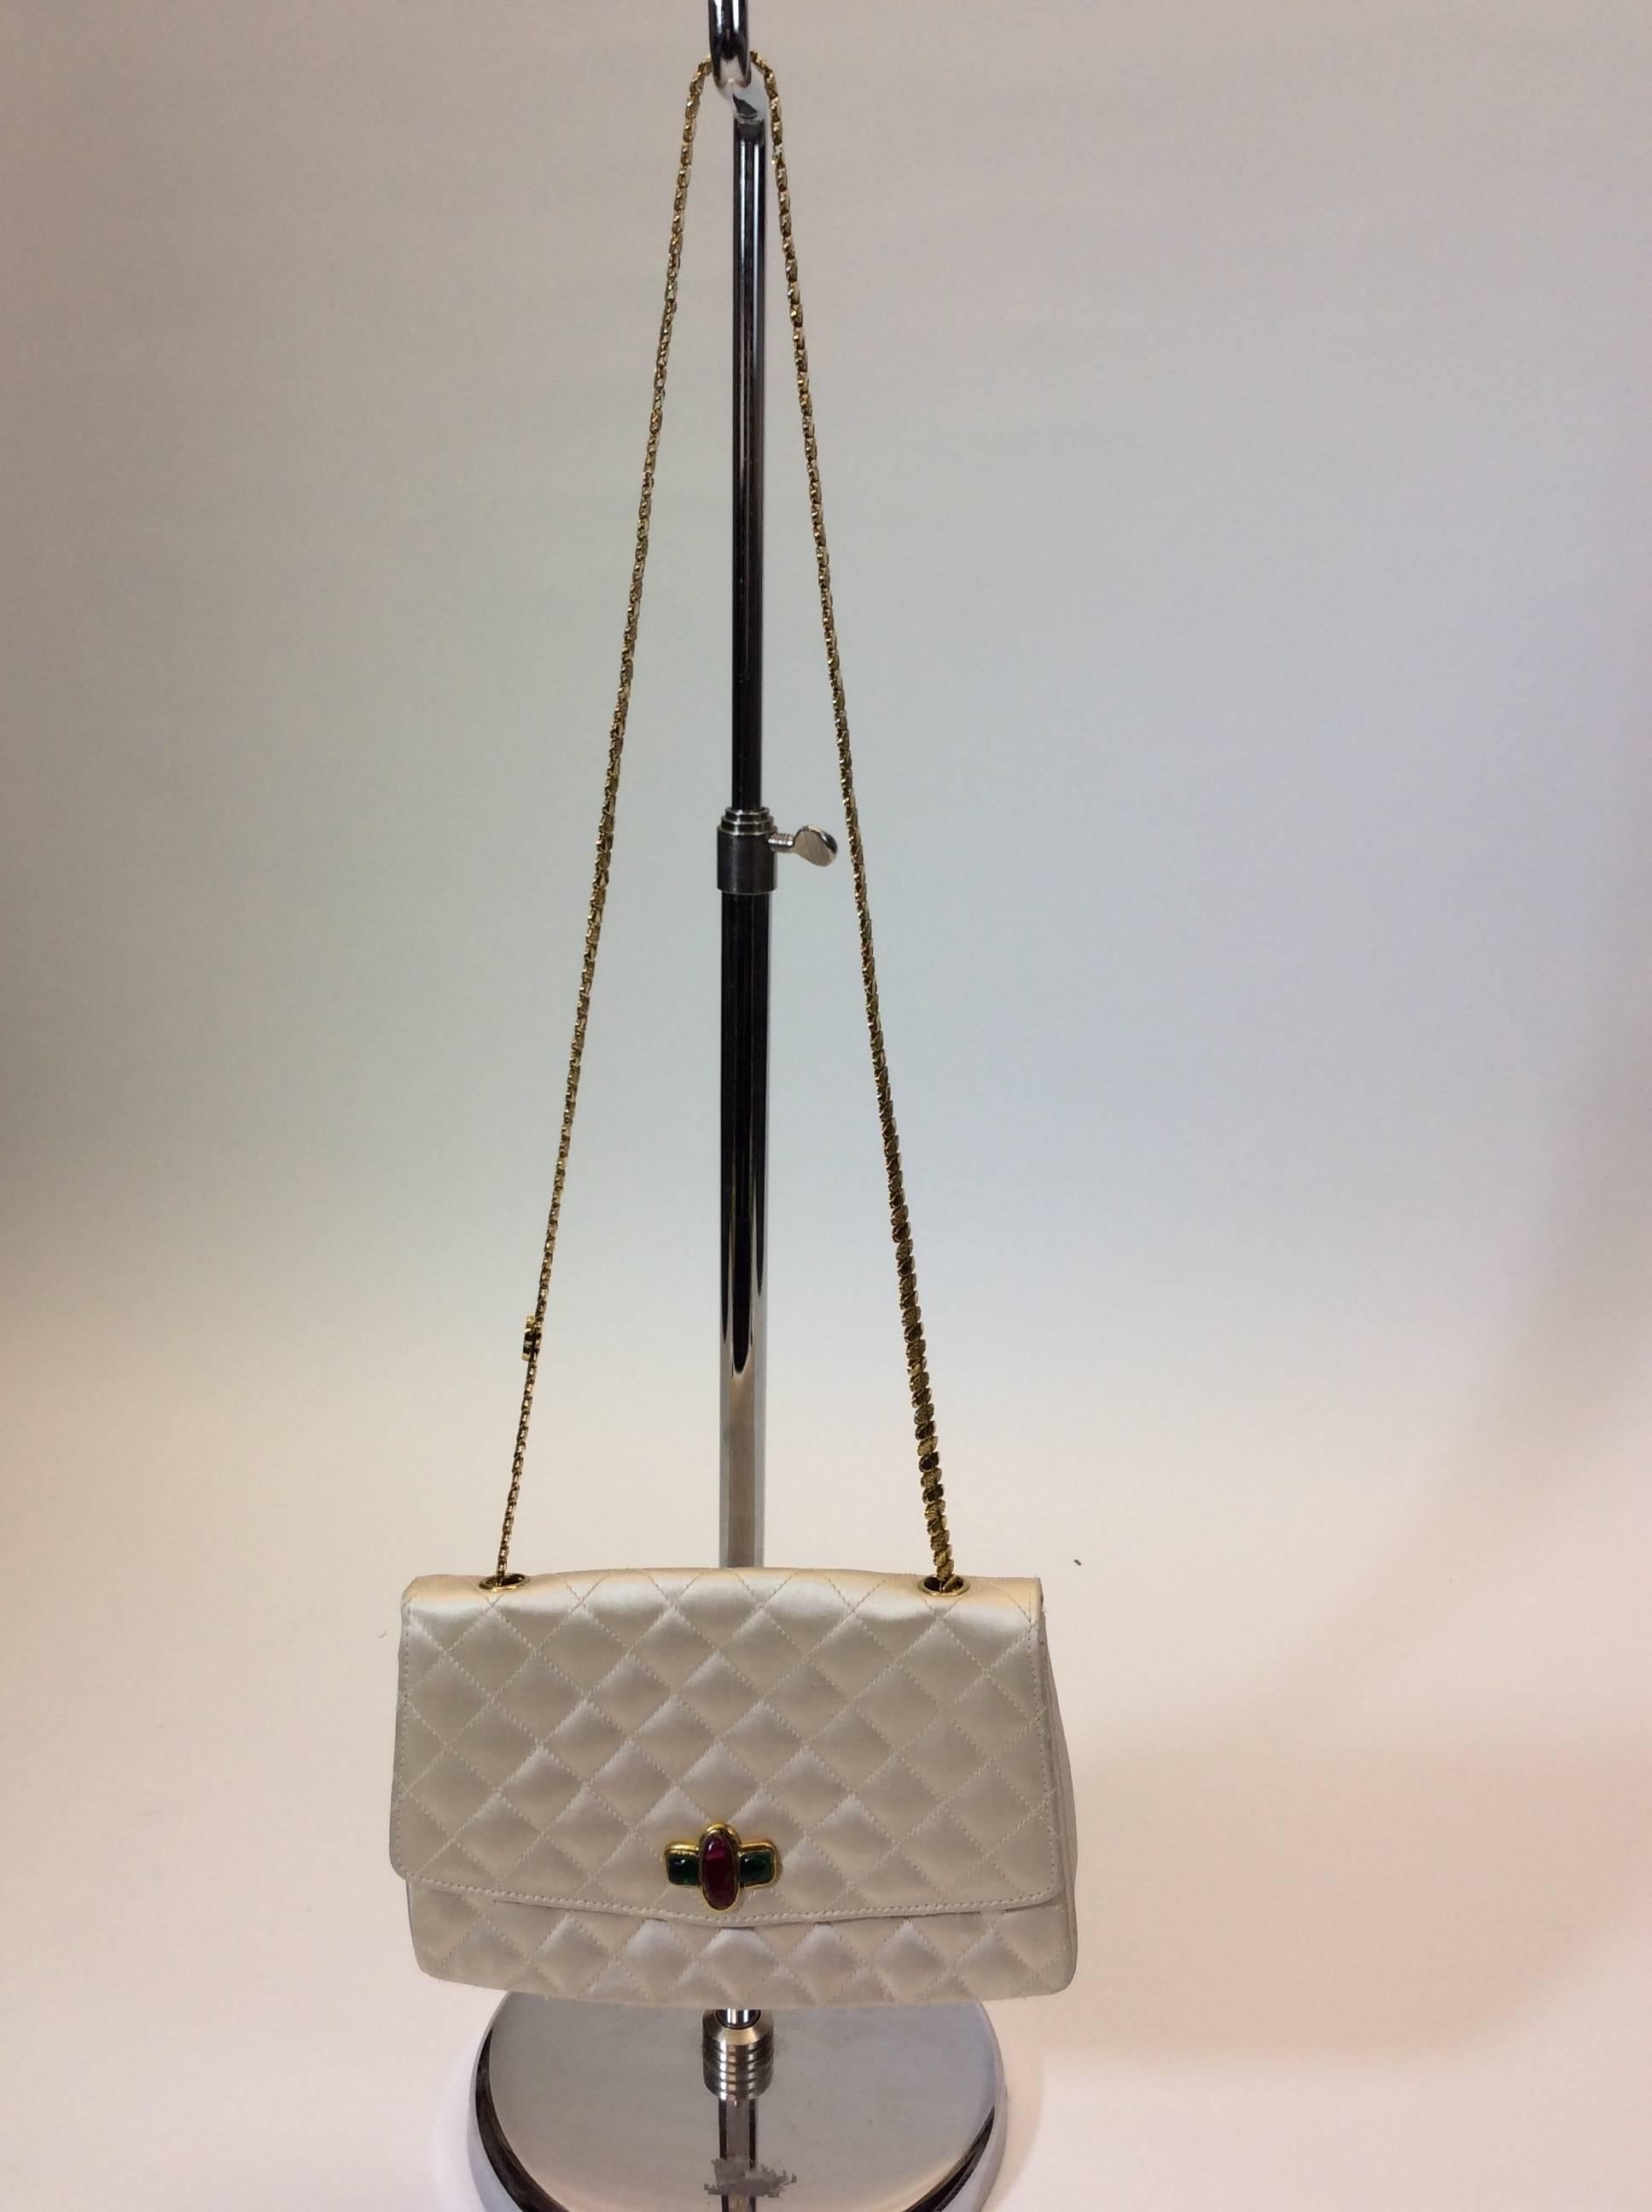 Women's Chanel Vintage Pleated White Purse with Gripoix Detail For Sale